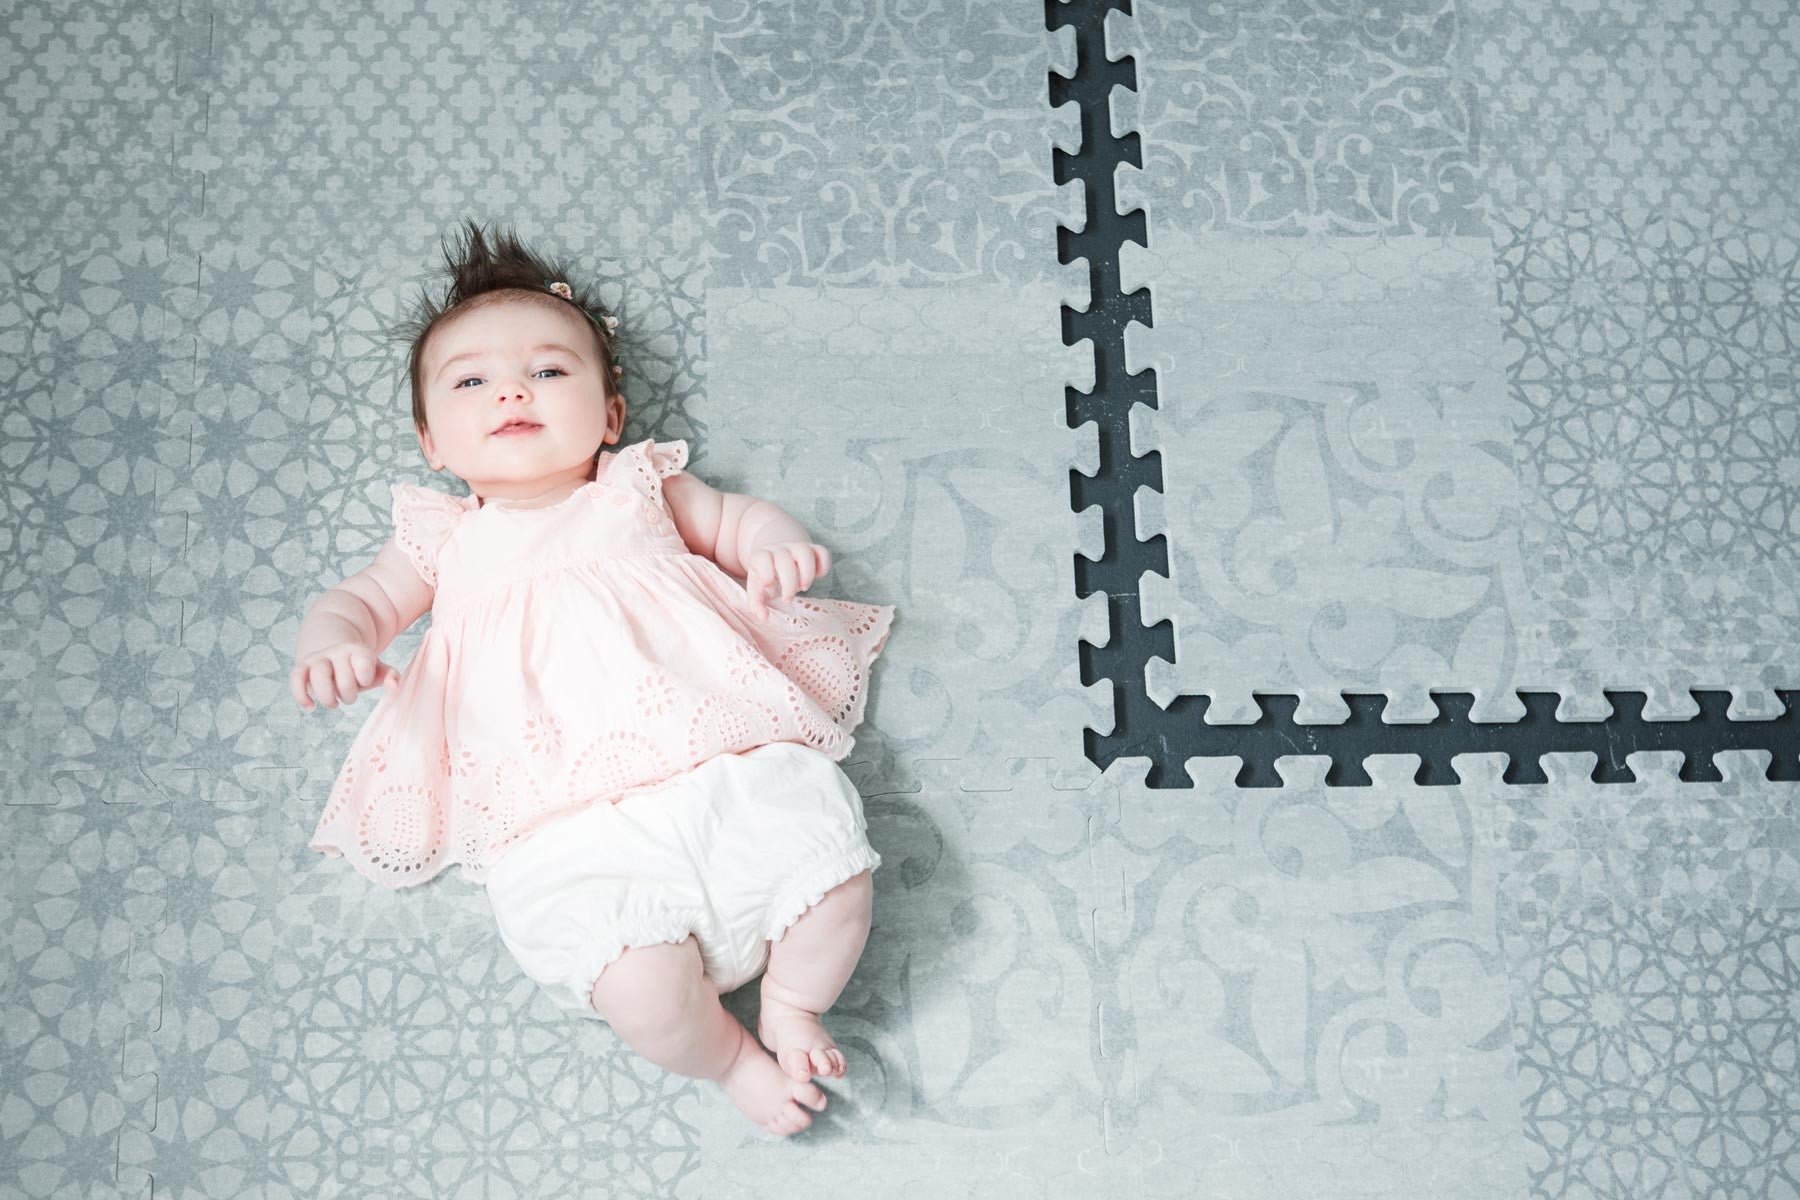 5 Simple Steps to Improve Your Own Baby Photography